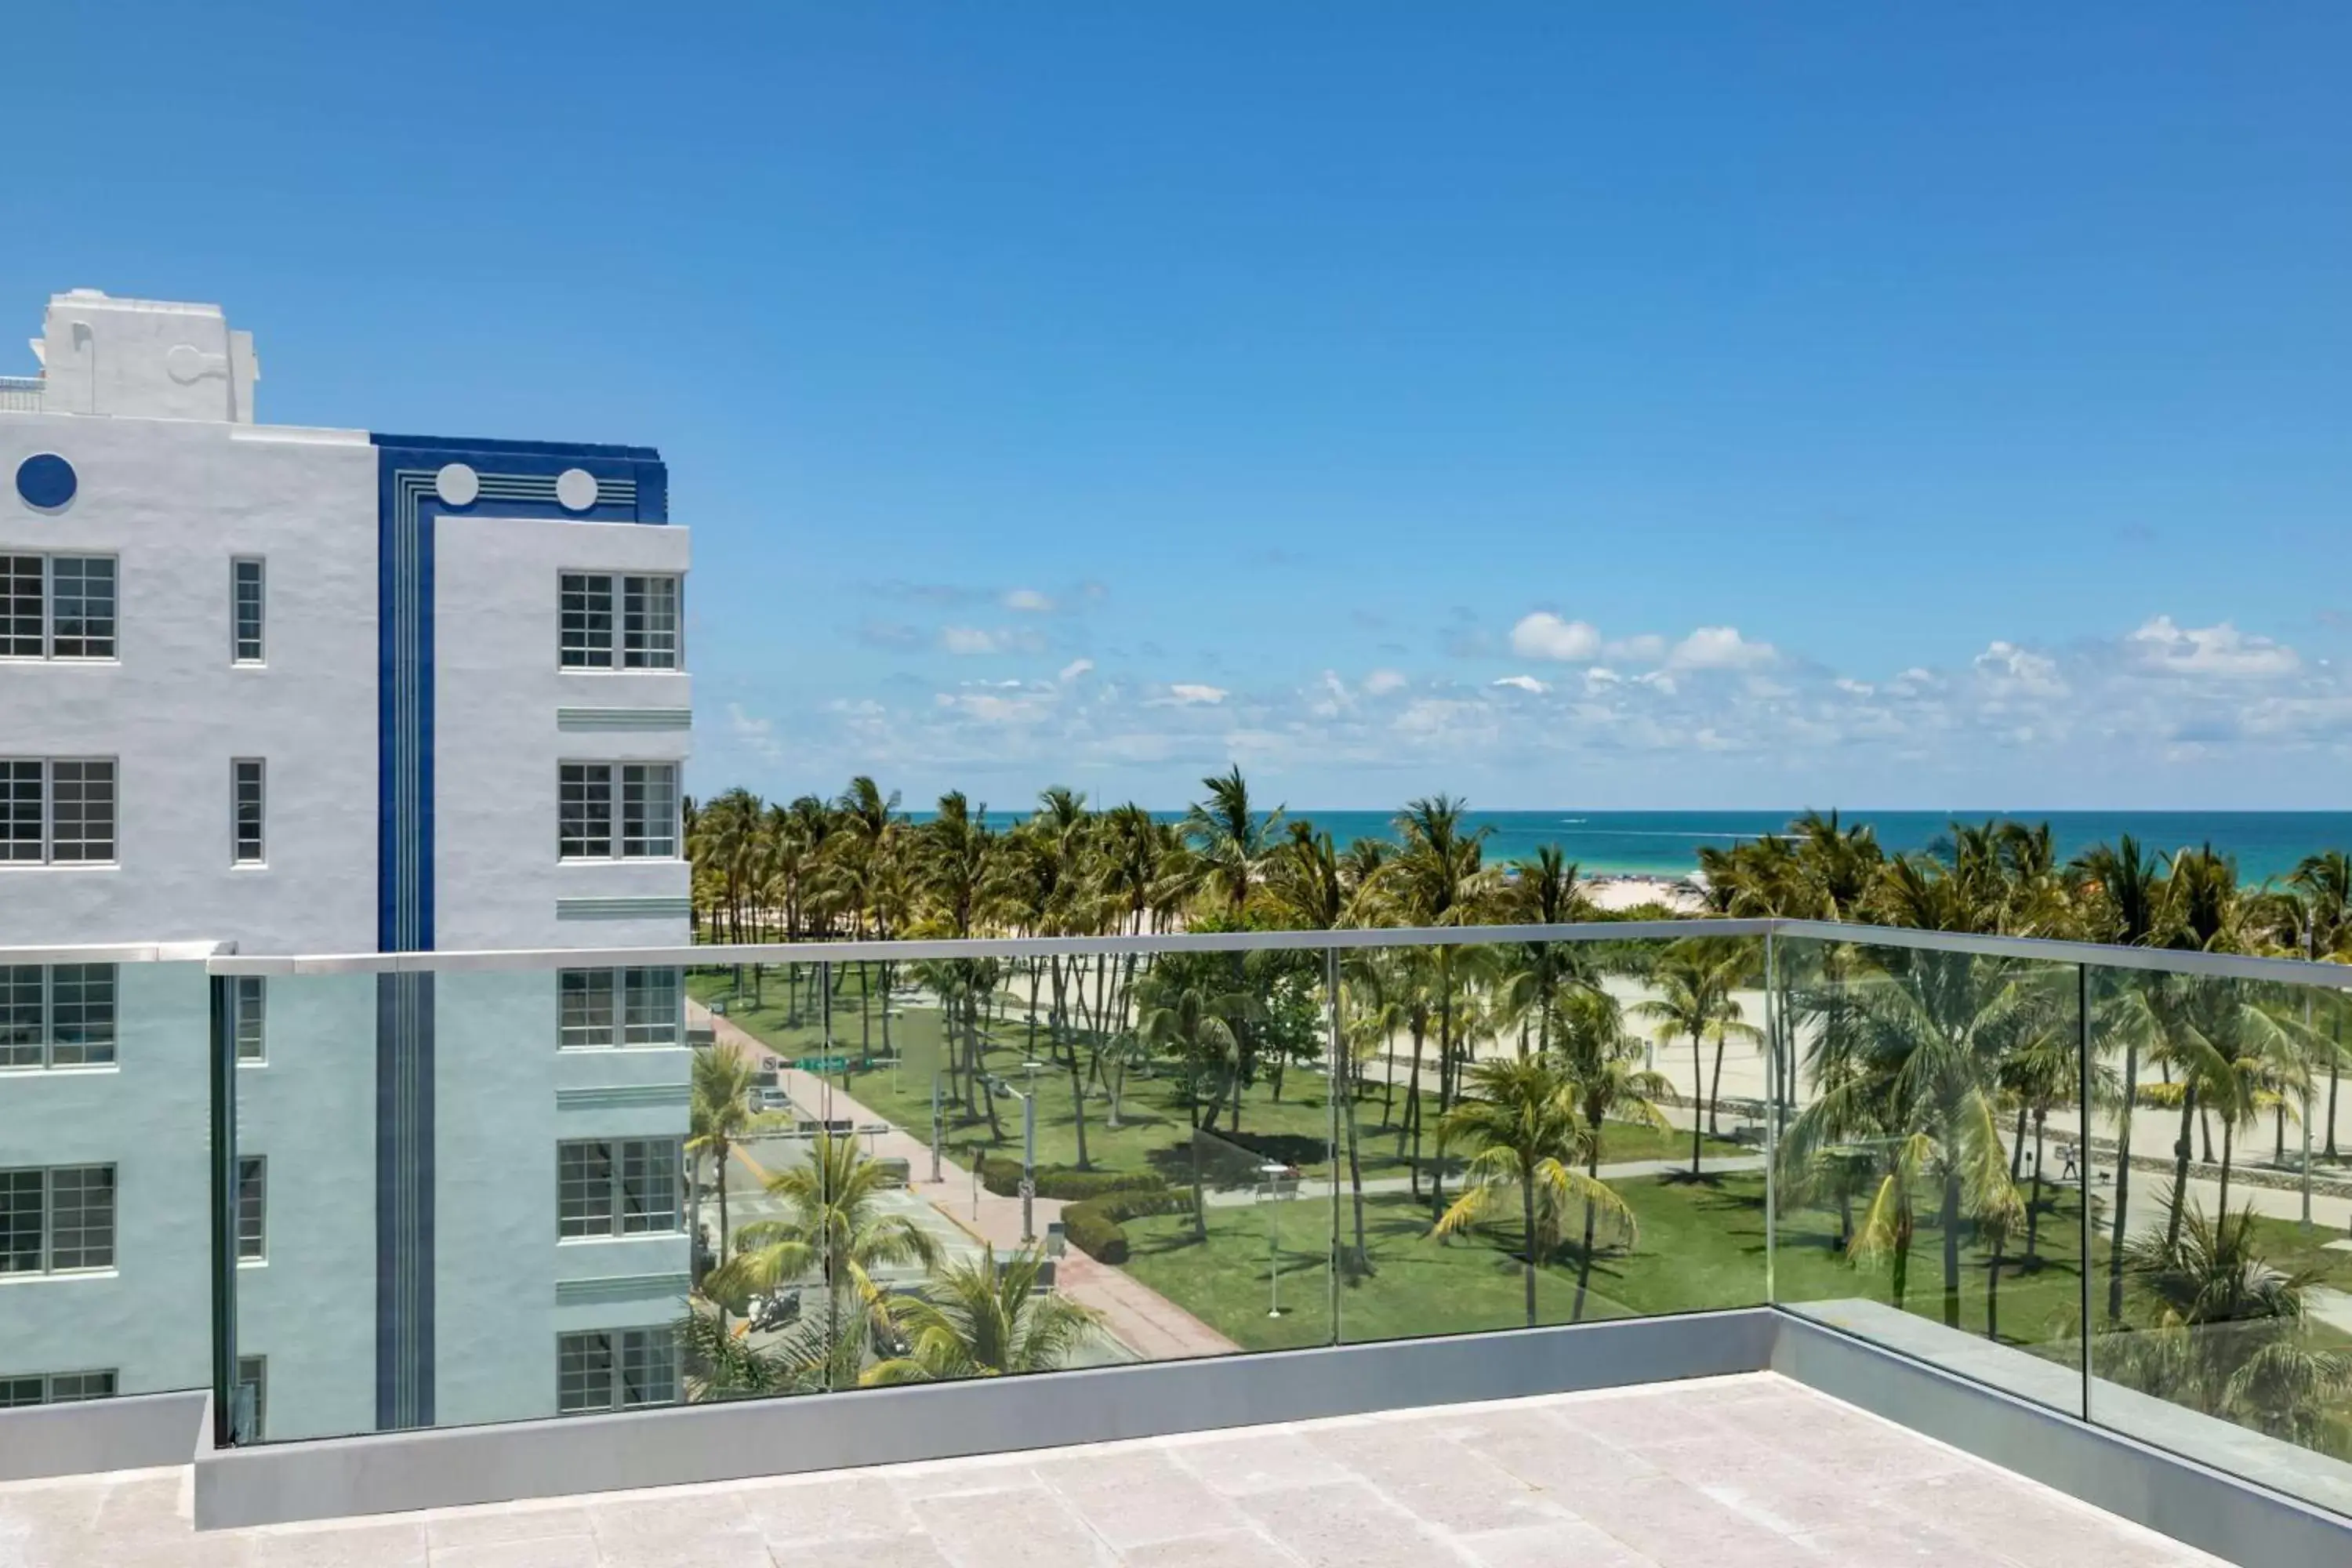 Property building in The Gabriel Miami South Beach, Curio Collection by Hilton